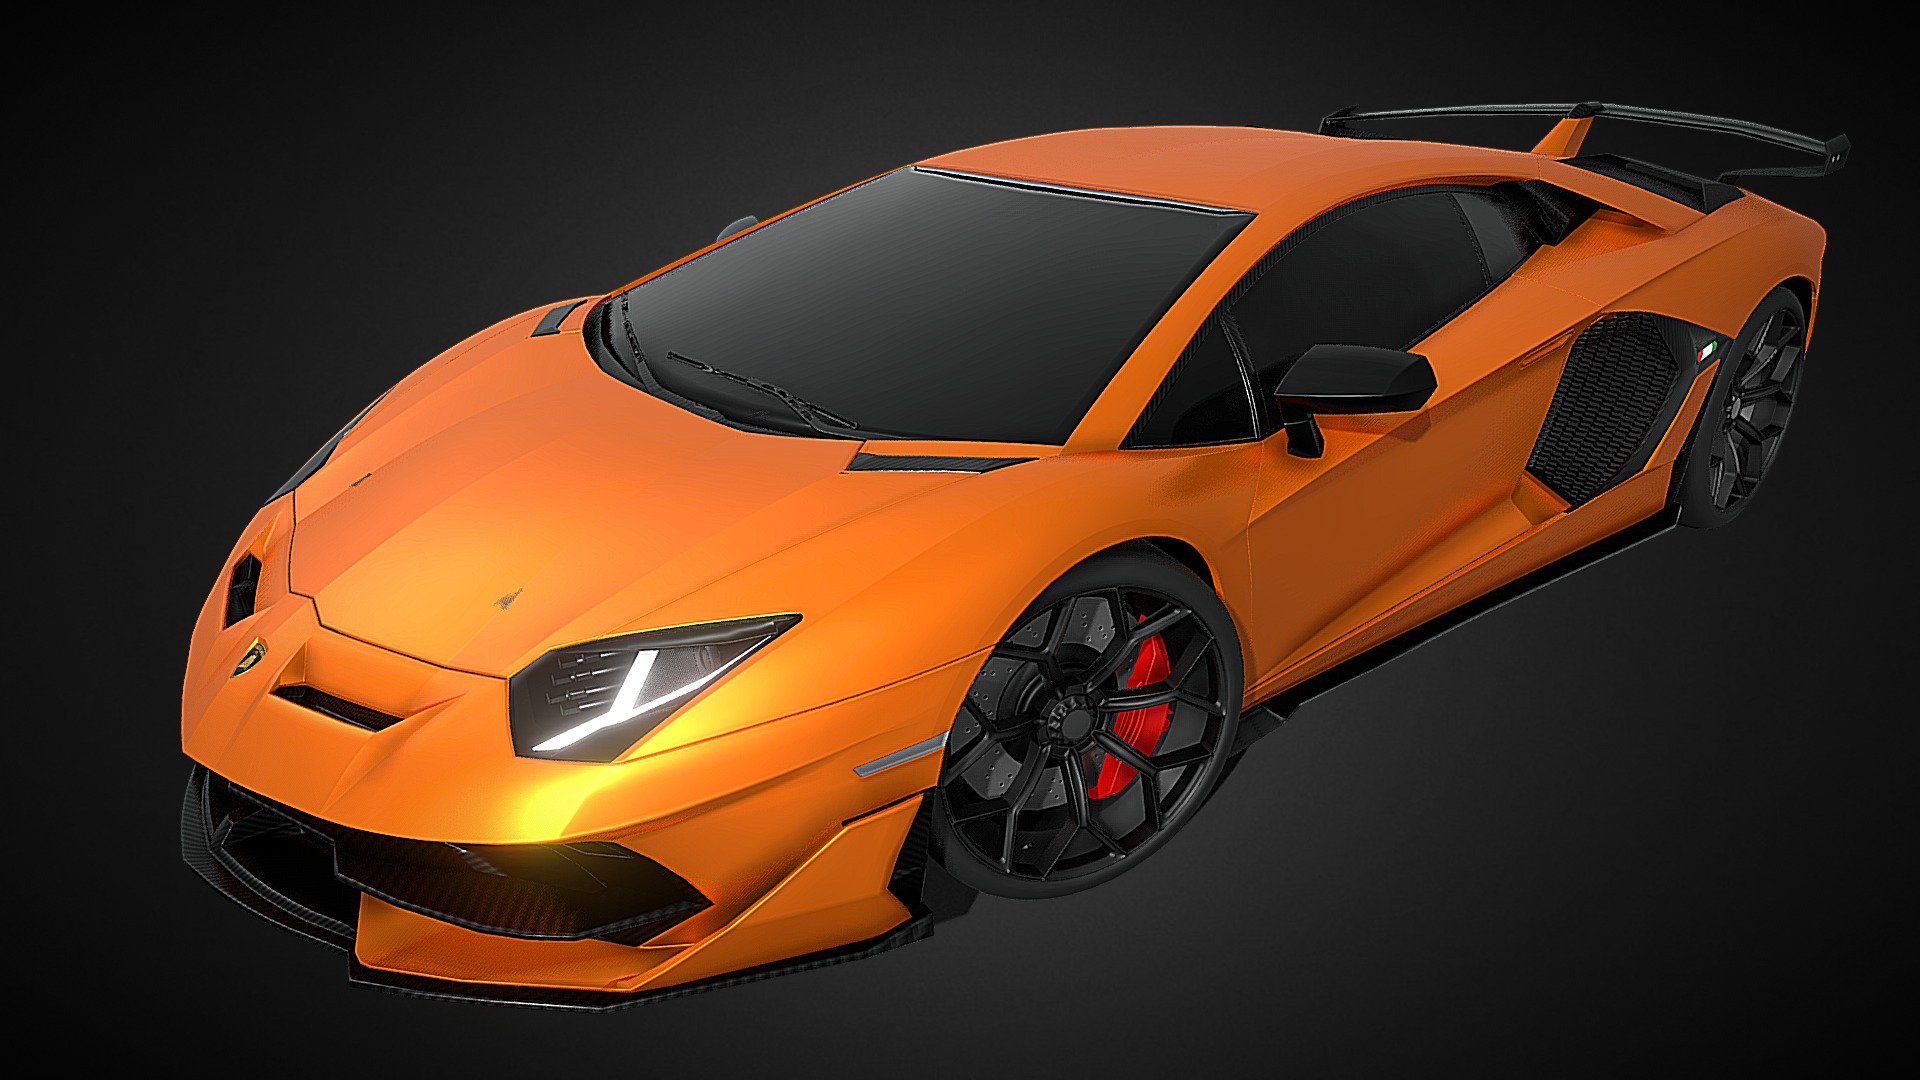 KING OF RING

The lamborghini SVJ and the ultimate version of the Aventador, it is currently one of the most efficient cars authorized to drive in the city, thanks to its V12 atmo of 770 hp and its weight of 1540 Kg, it goes from 0 to 100 in 2.8 and reached 355 km / h.

Blender 2.9 + TEXTURES 4K + SOUND - Free dowload ; )

For more models, click here: (all is free!) :

https://sketchfab.com/3Duae - Lamborghini Aventador SVJ SDC ( FREE ) - Download Free 3D model by SDC PERFORMANCE™️ (@3Duae) 3d model